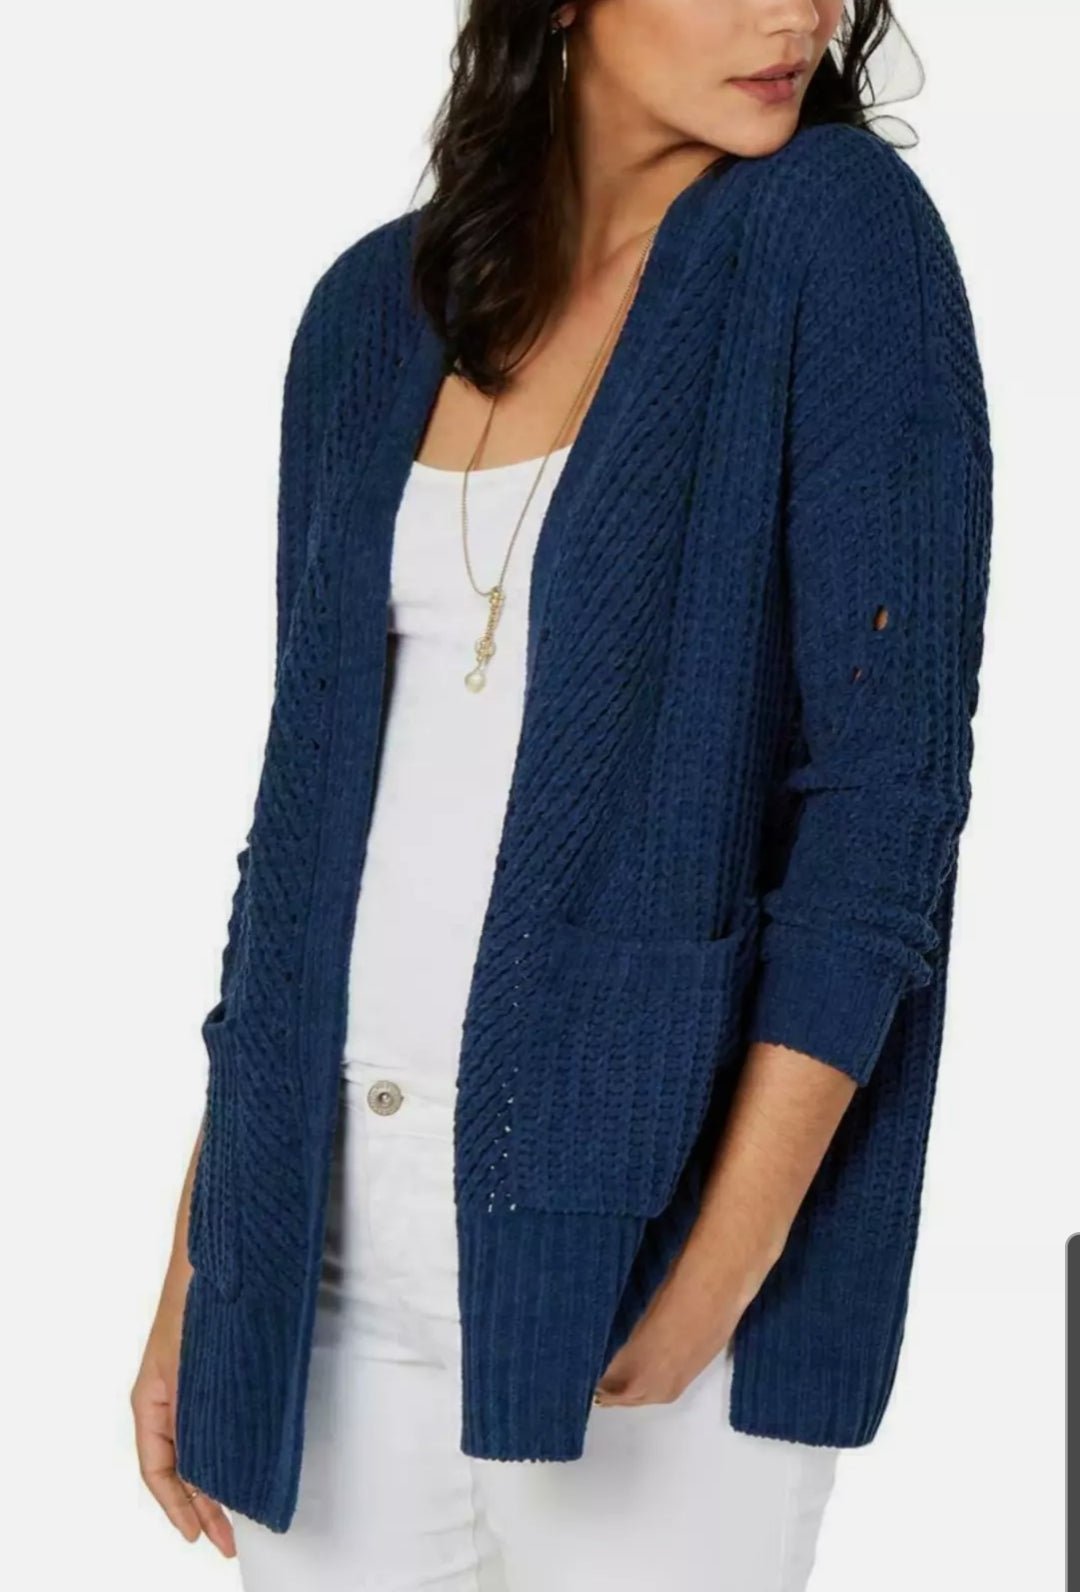 Style & Co Women's Large Cardigan Open Front Chenille Sweater Navy Blue NEW #42 - BELLEZA'S - Style & Co Women's Large Cardigan Open Front Chenille Sweater Navy Blue NEW #42 - BELLEZA'S - -